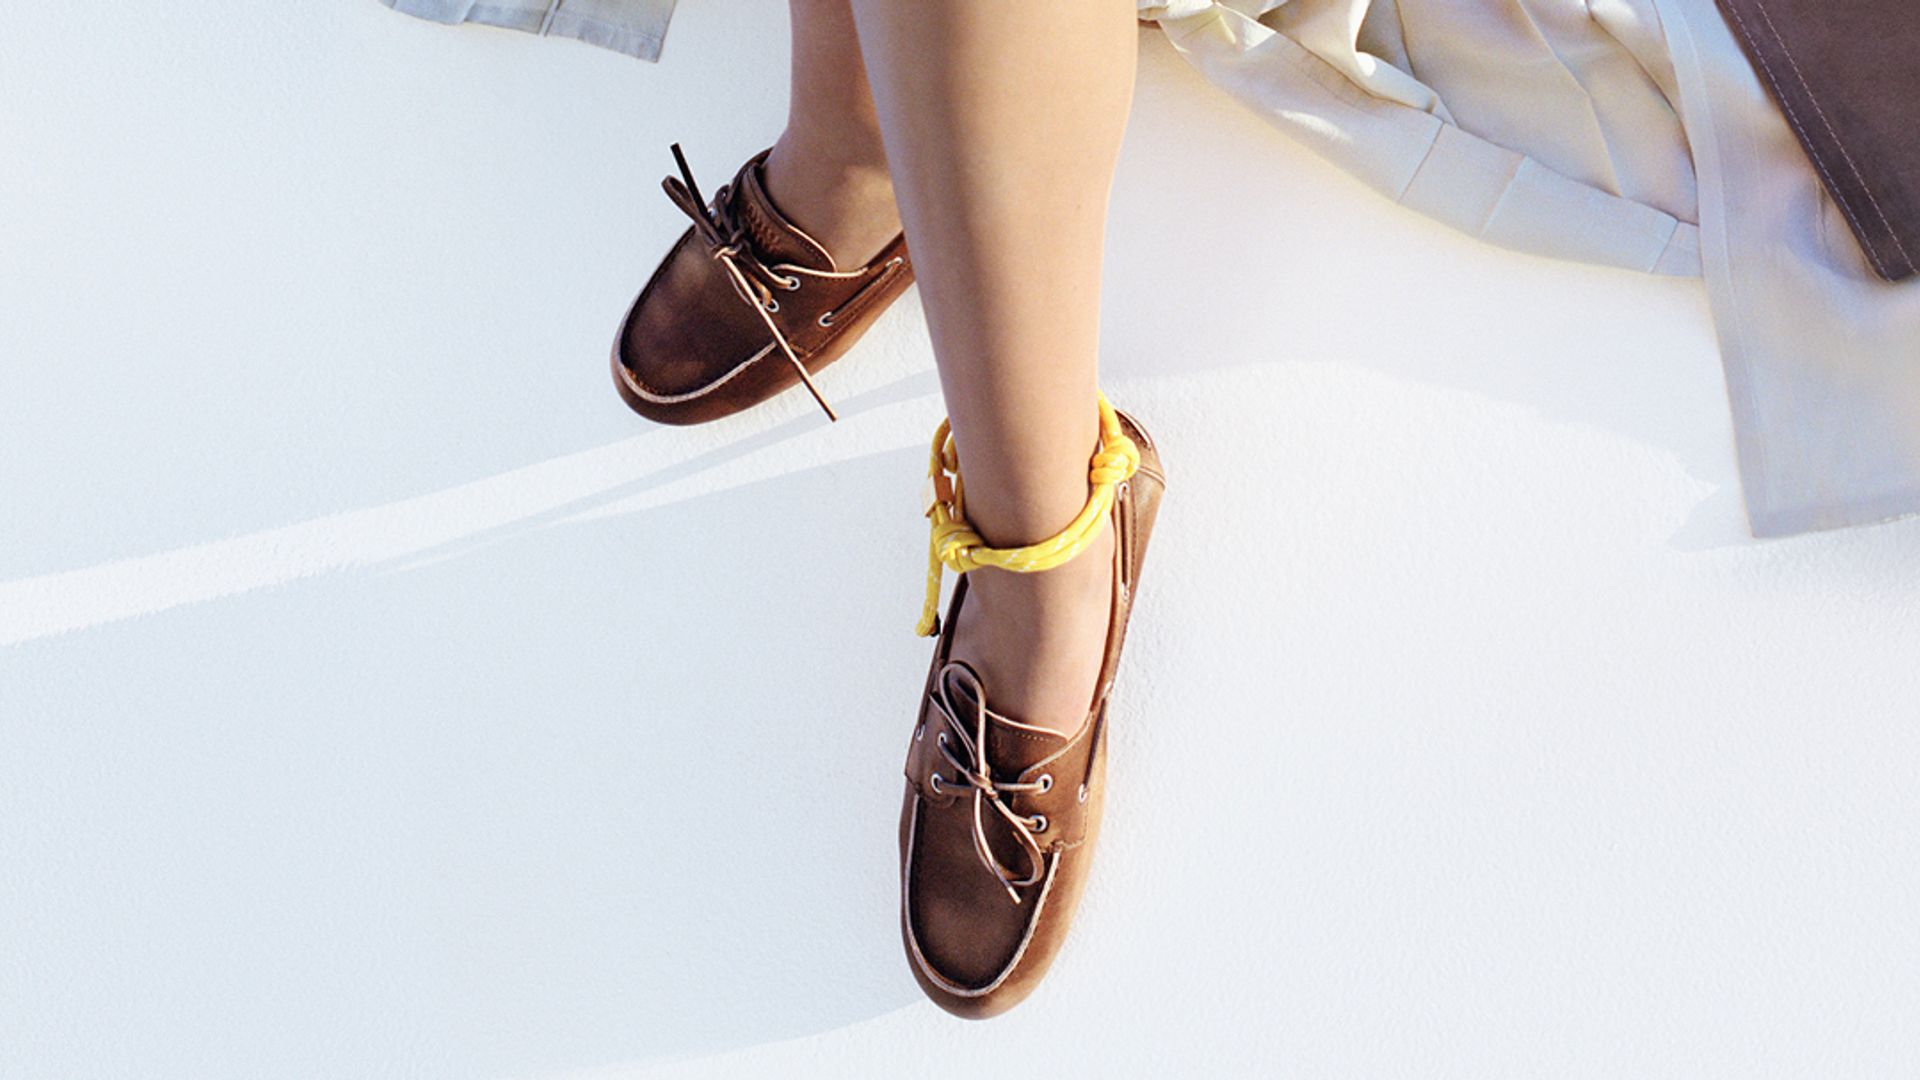 Boat shoes are back: here's how the fashion set is styling them